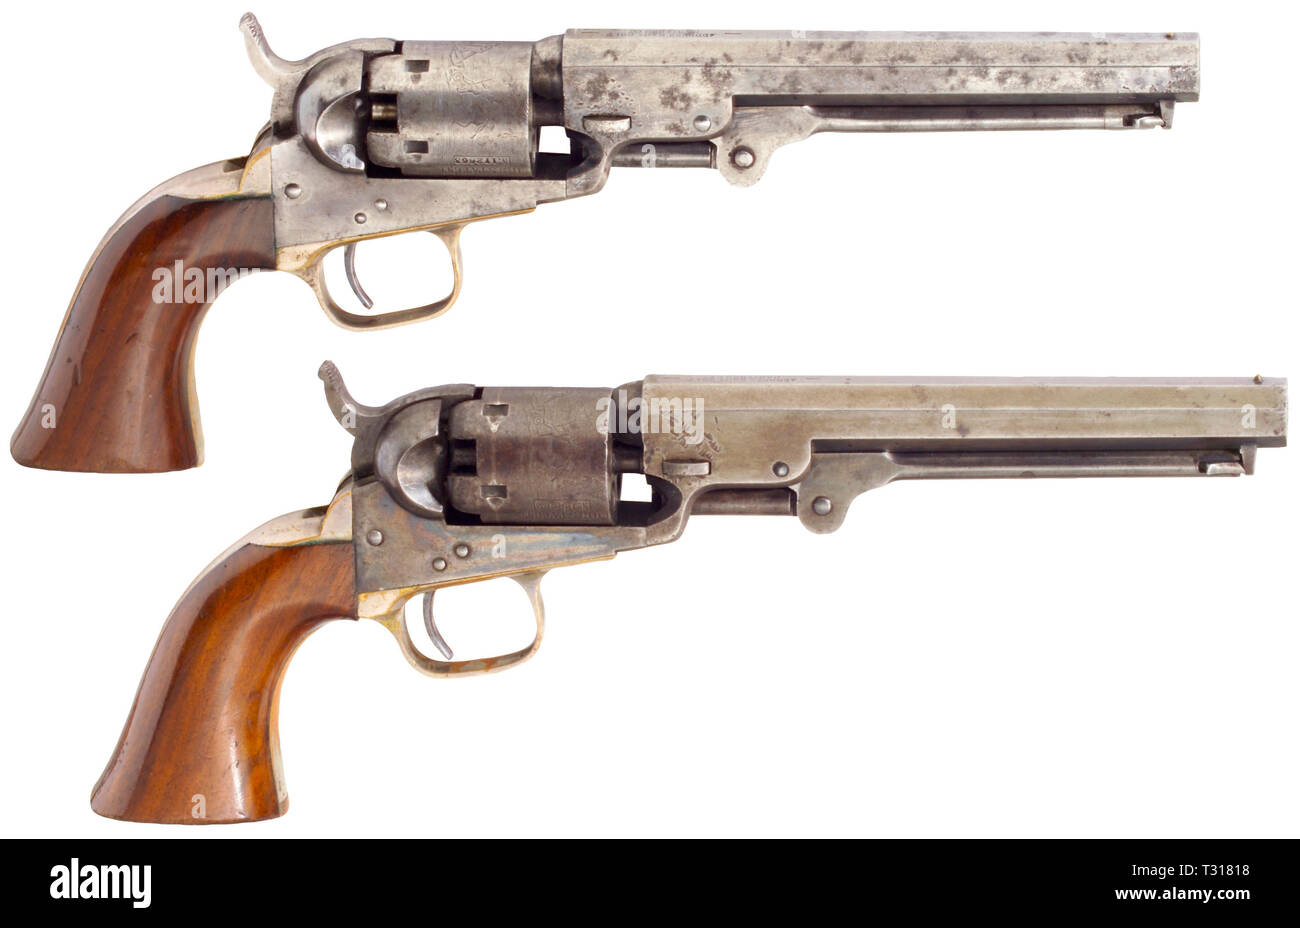 Kleinwaffen, Revolver, Colt Army Modell 1860, Kaliber.44, Colt Tasche 1849  Additional-Rights - Clearance-Info - Not-Available Stockfotografie - Alamy